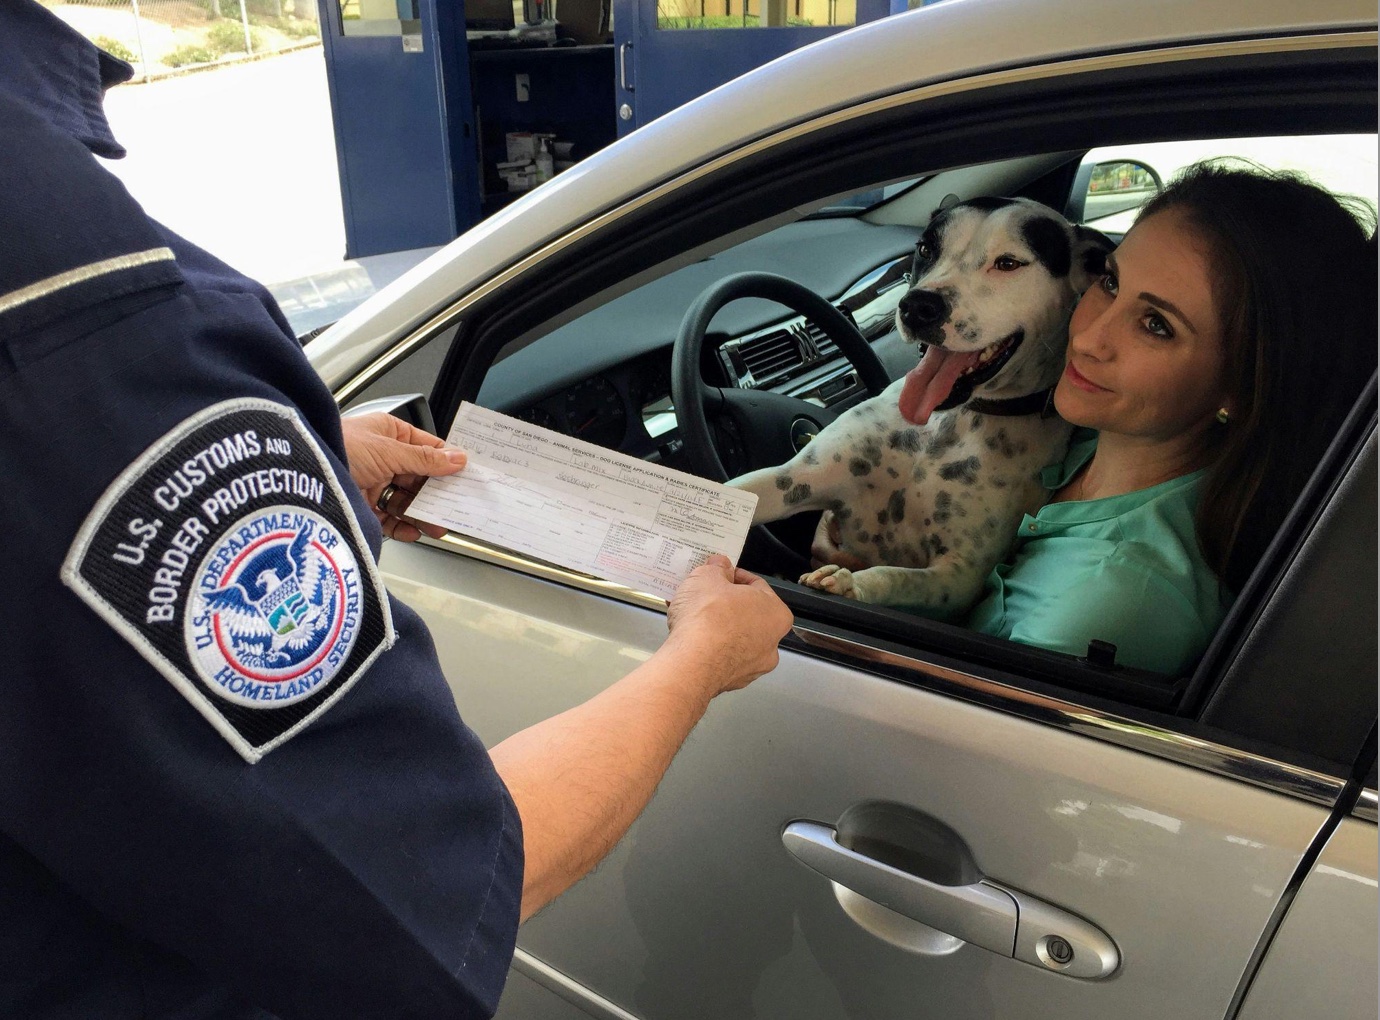 Woman in car wearing green shirt holding white and black short coated dog; image by CDC, via Unsplash.com.